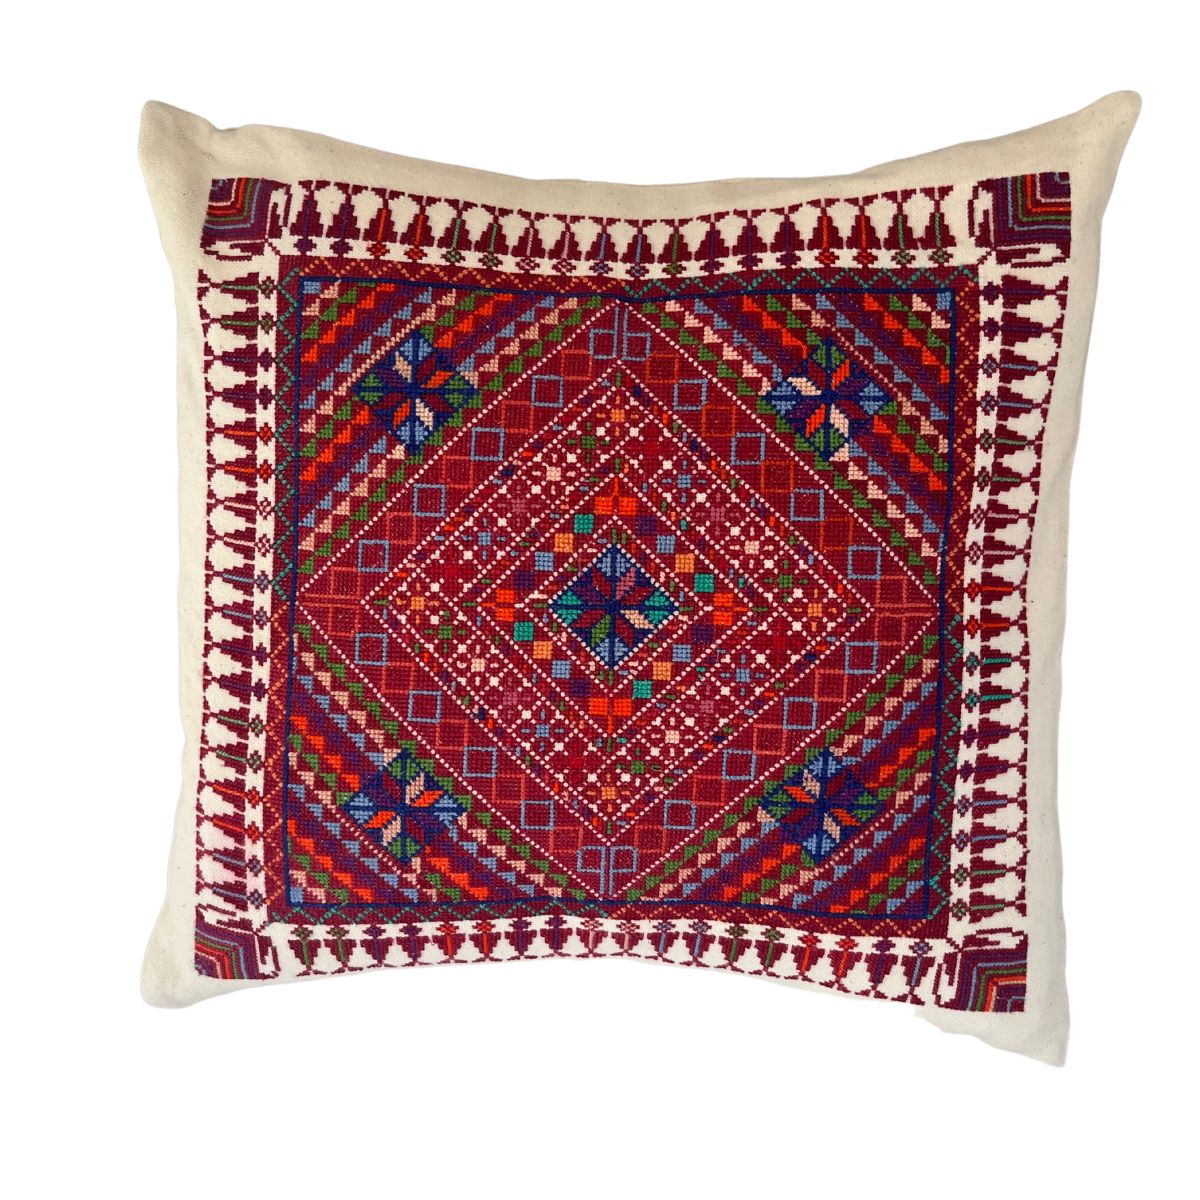 Embroidered Pillow from Gaza